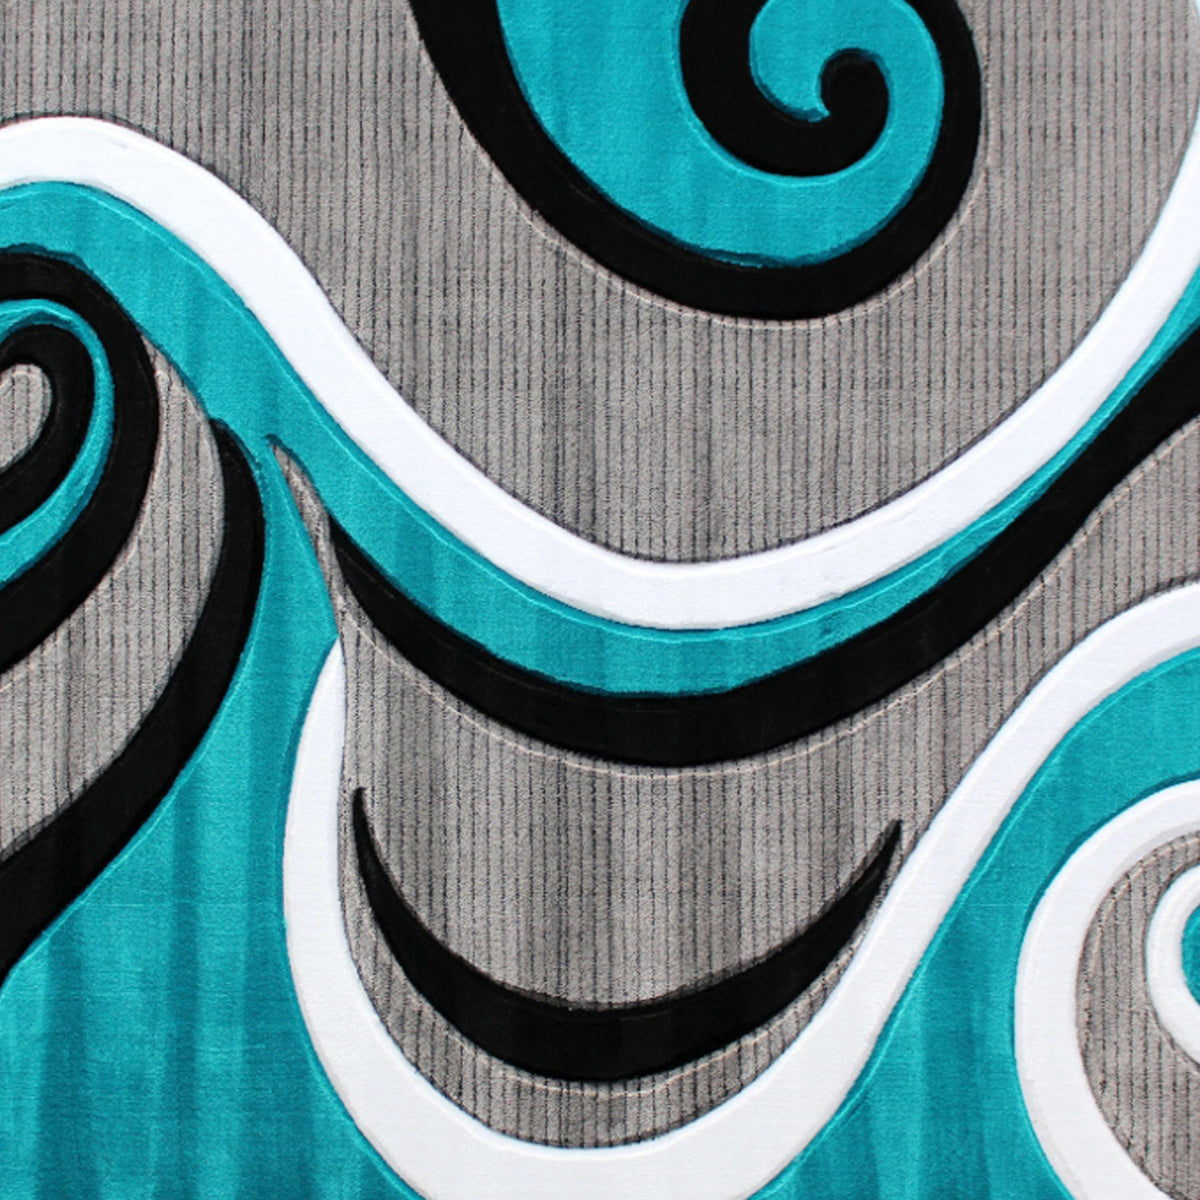 Turquoise,8' x 10' |#| Modern High-Low Sculpted Swirl Design Abstract Area Rug - Turquoise - 8' x 10'